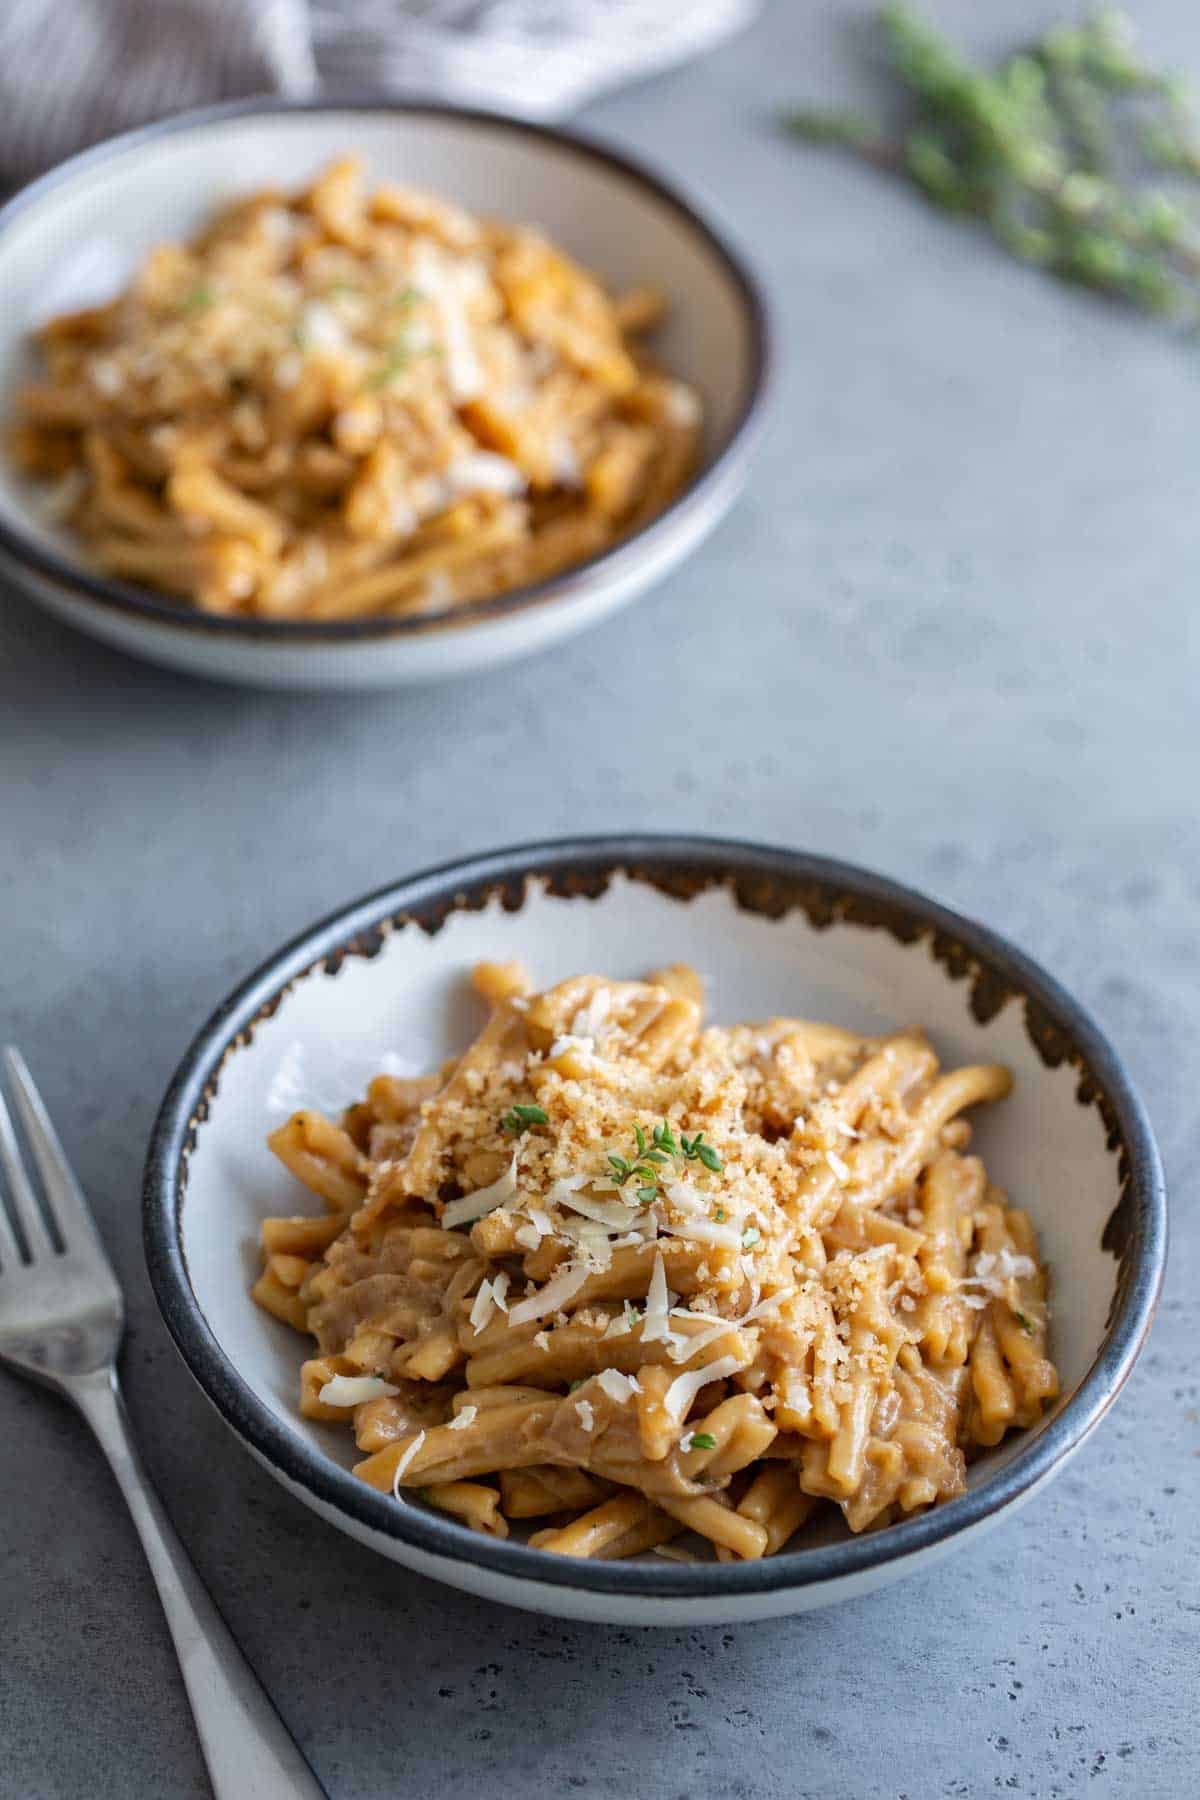 Two bowls of pasta with cheese on top.